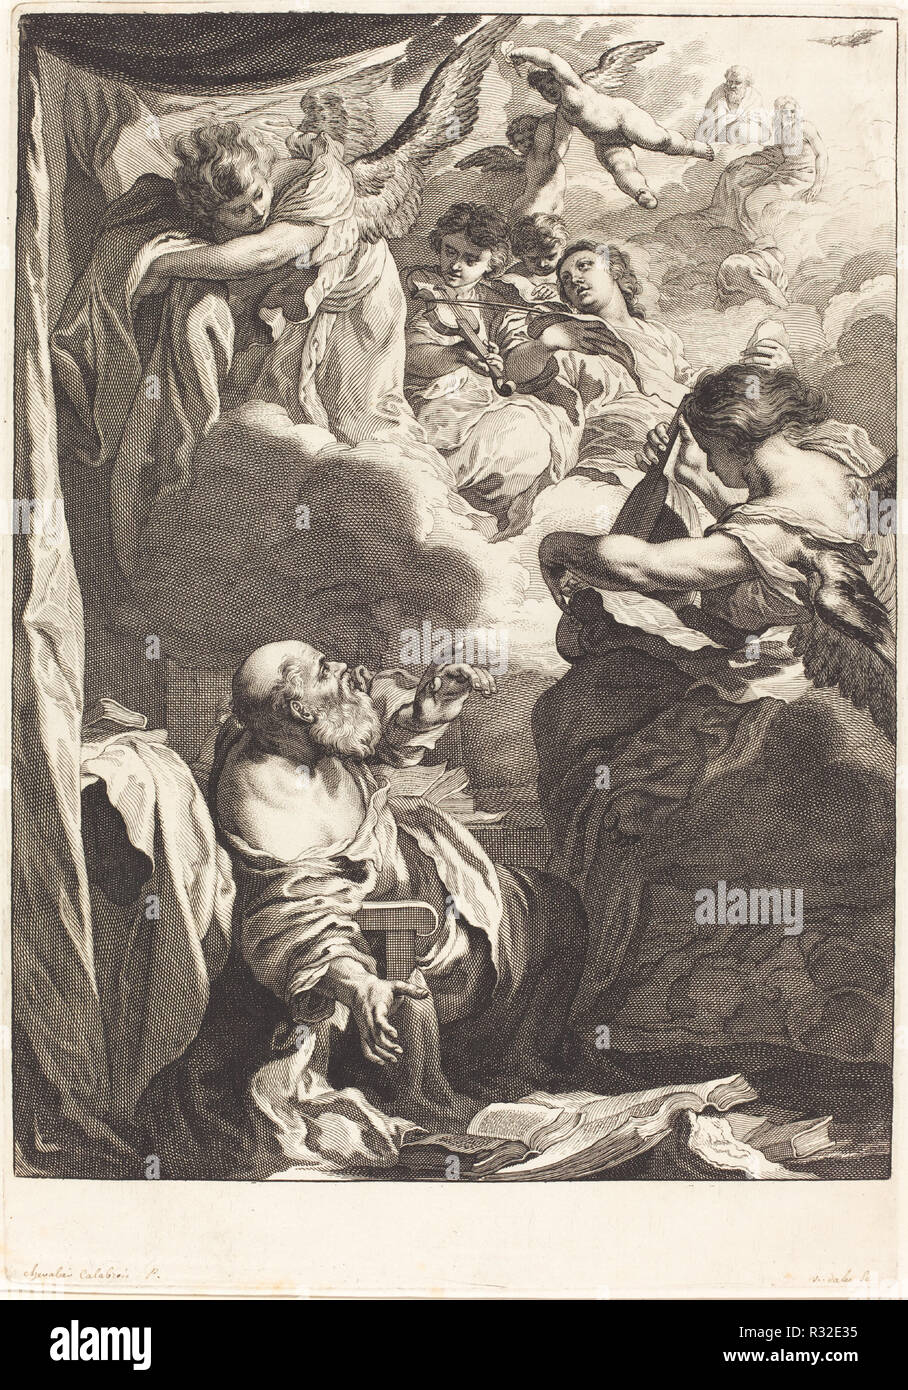 The Ecstasy of Saint Paul. Dated: c. 1655. Dimensions: plate: 41.8 x 29 cm (16 7/16 x 11 7/16 in.)  sheet: 52.5 x 39 cm (20 11/16 x 15 3/8 in.). Medium: engraving and etching on laid paper [proof]. Museum: National Gallery of Art, Washington DC. Author: JEREMIAS FALCK. Stock Photo